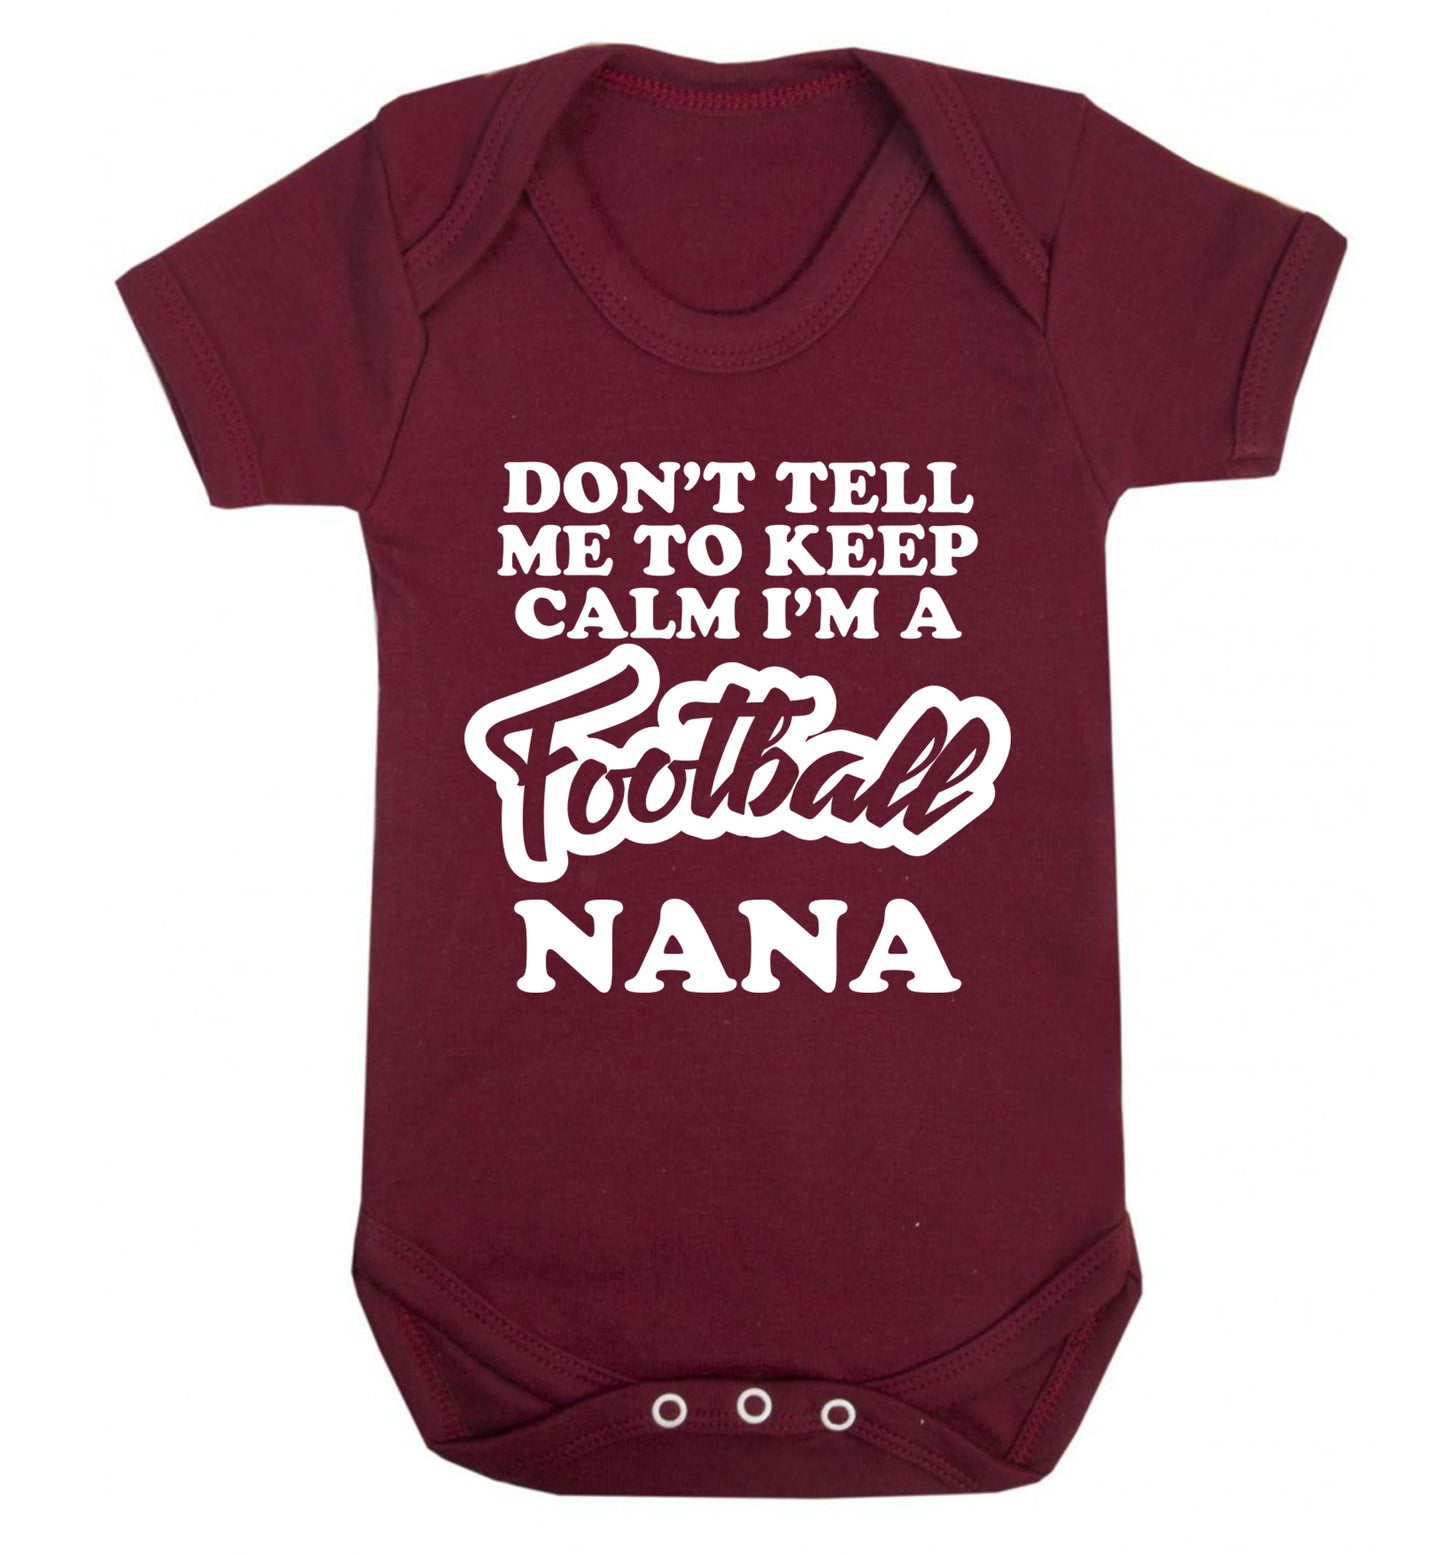 Don't tell me to keep calm I'm a football nana Baby Vest maroon 18-24 months